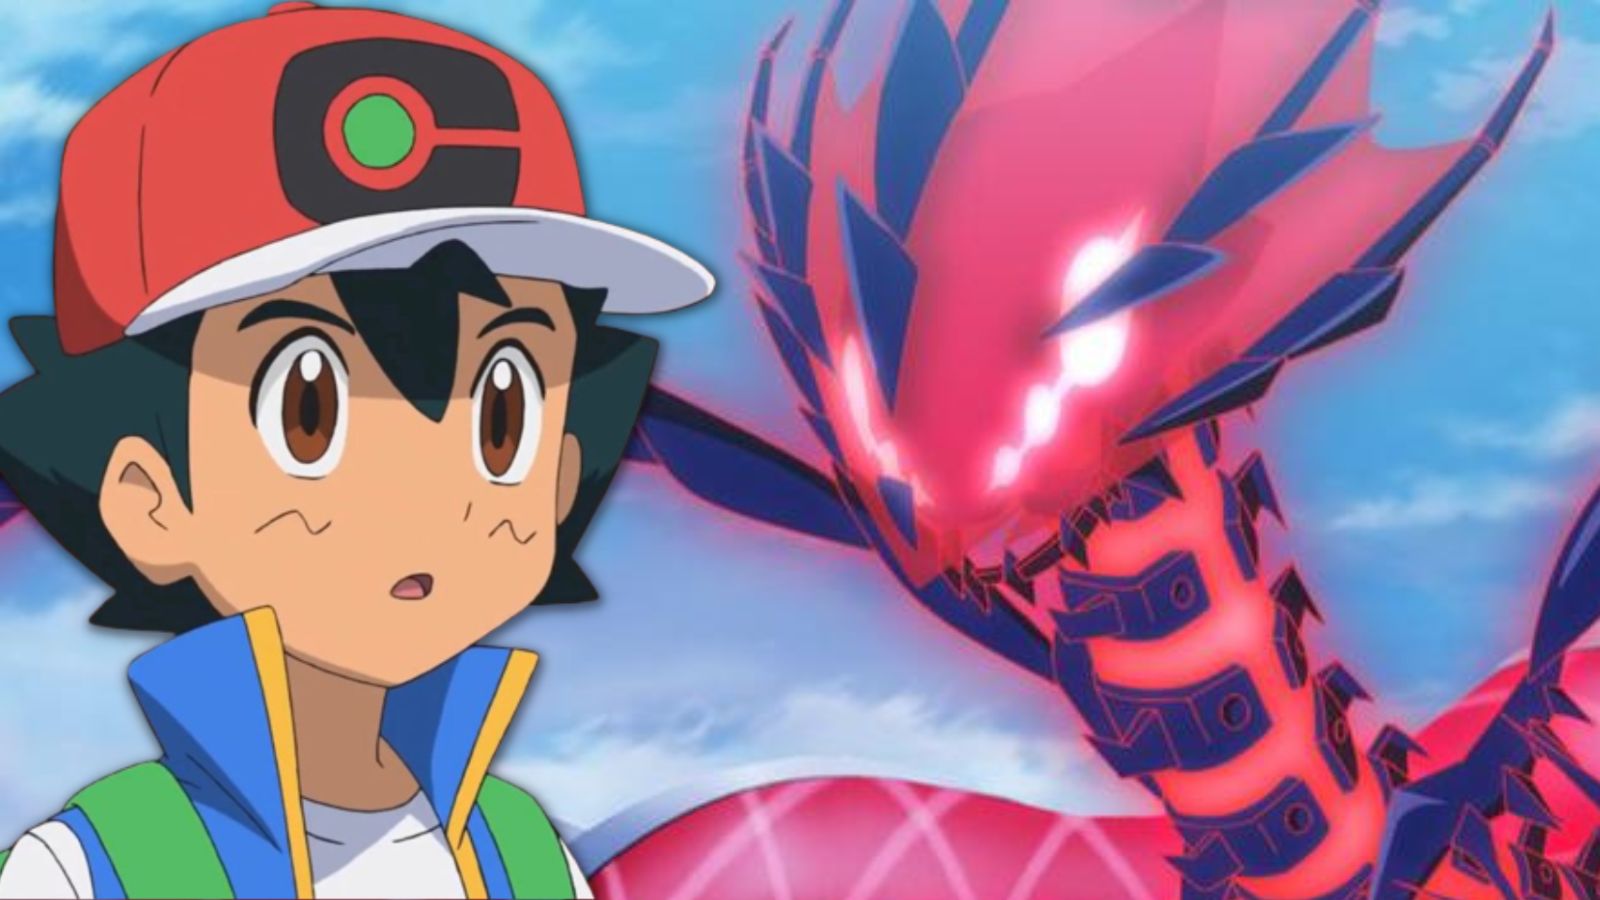 Why Ash's Pikachu will never evolve in the Pokemon anime - Dexerto